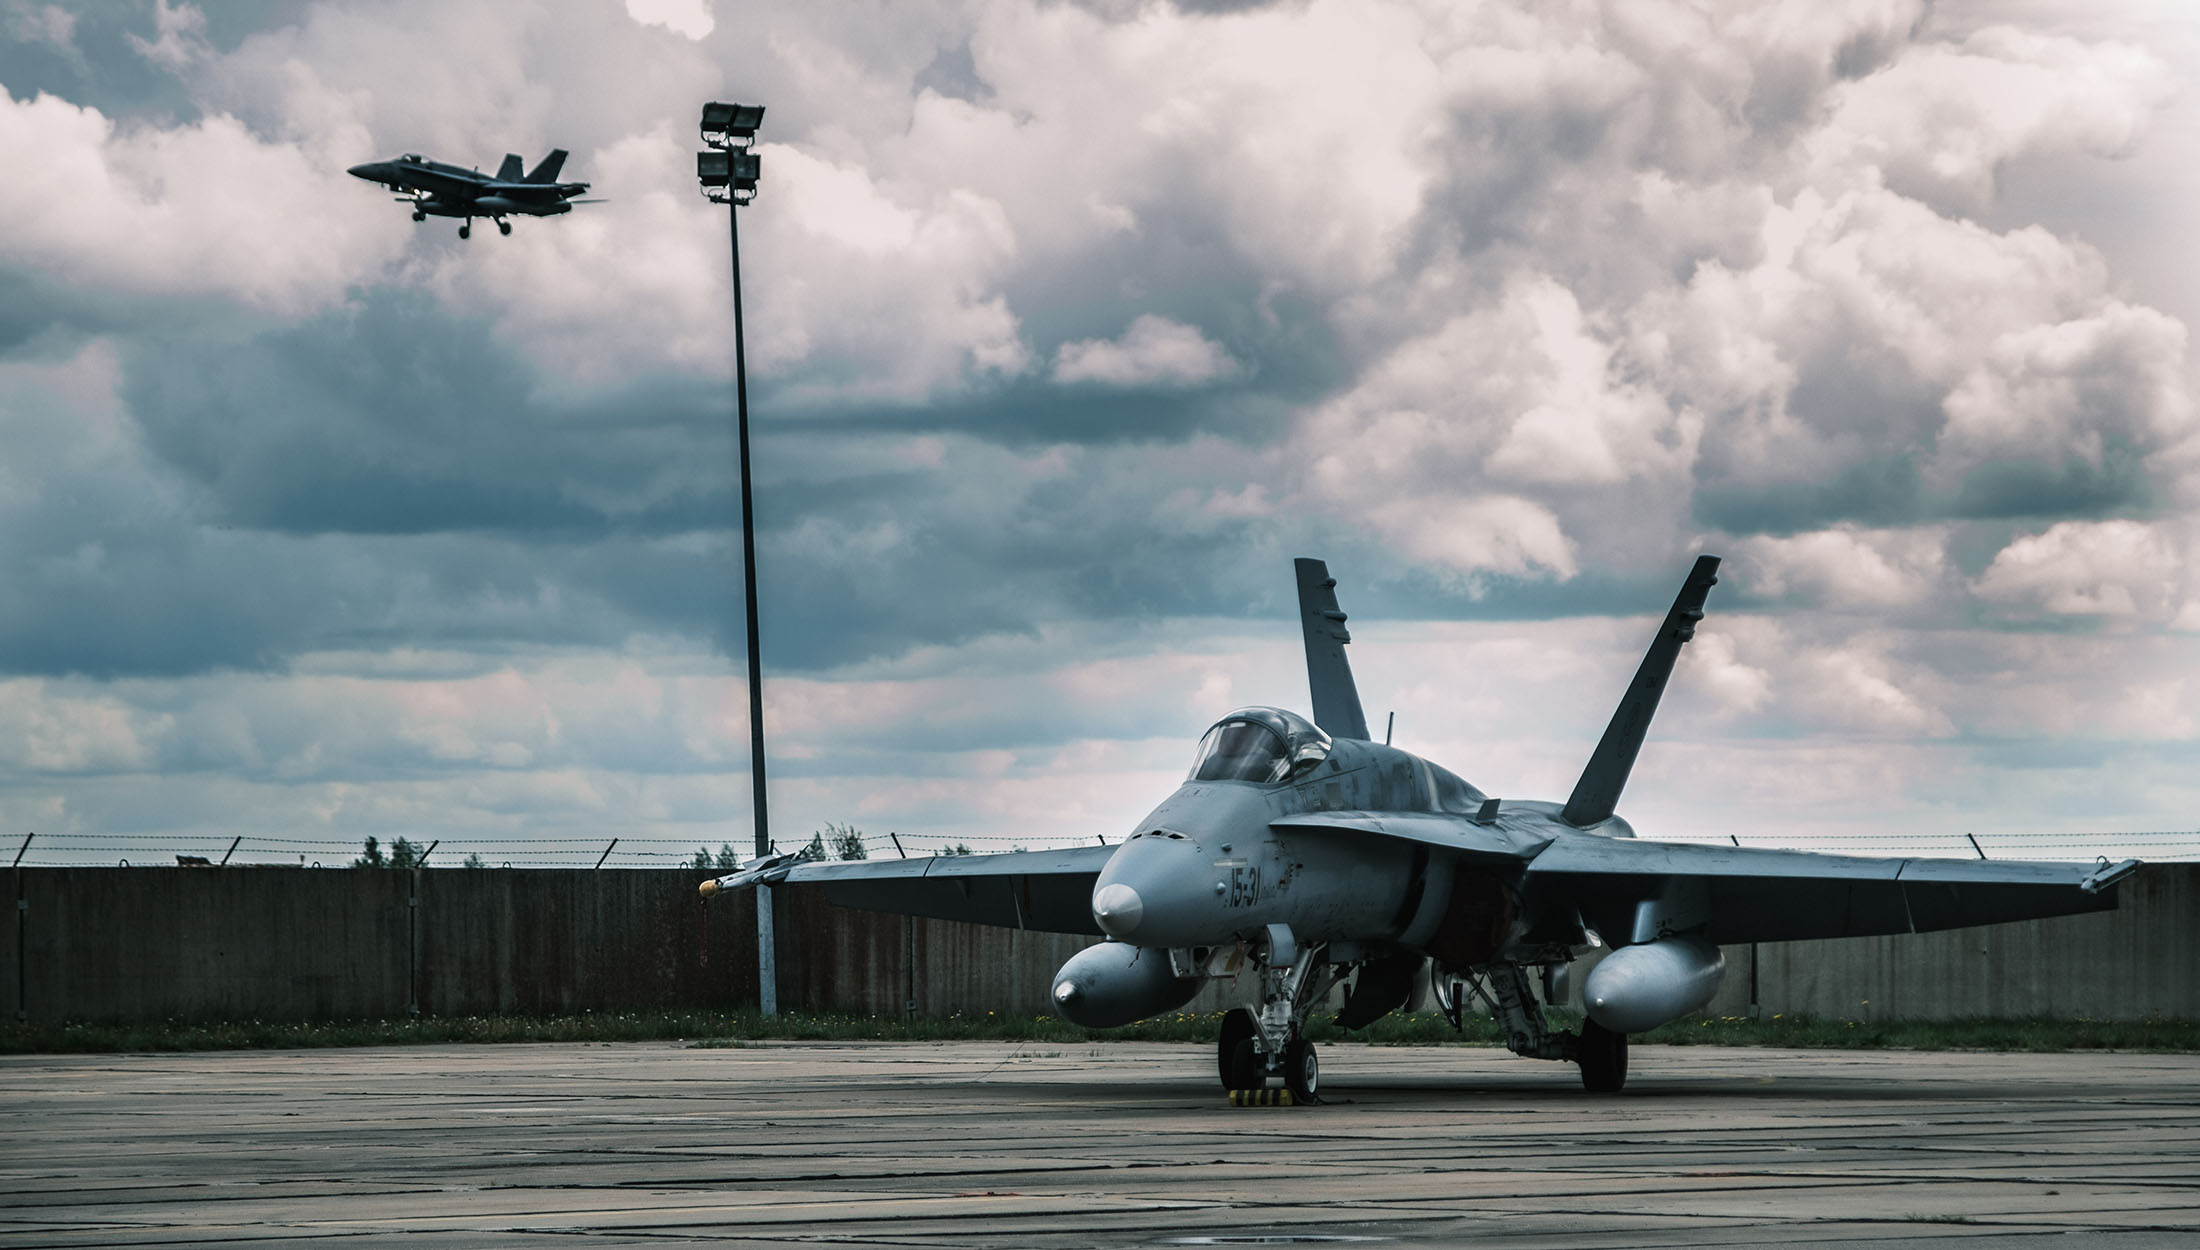 Spanish Air Force Successfully Completes First Month Leading NATOâ€™s Baltic Air Policing